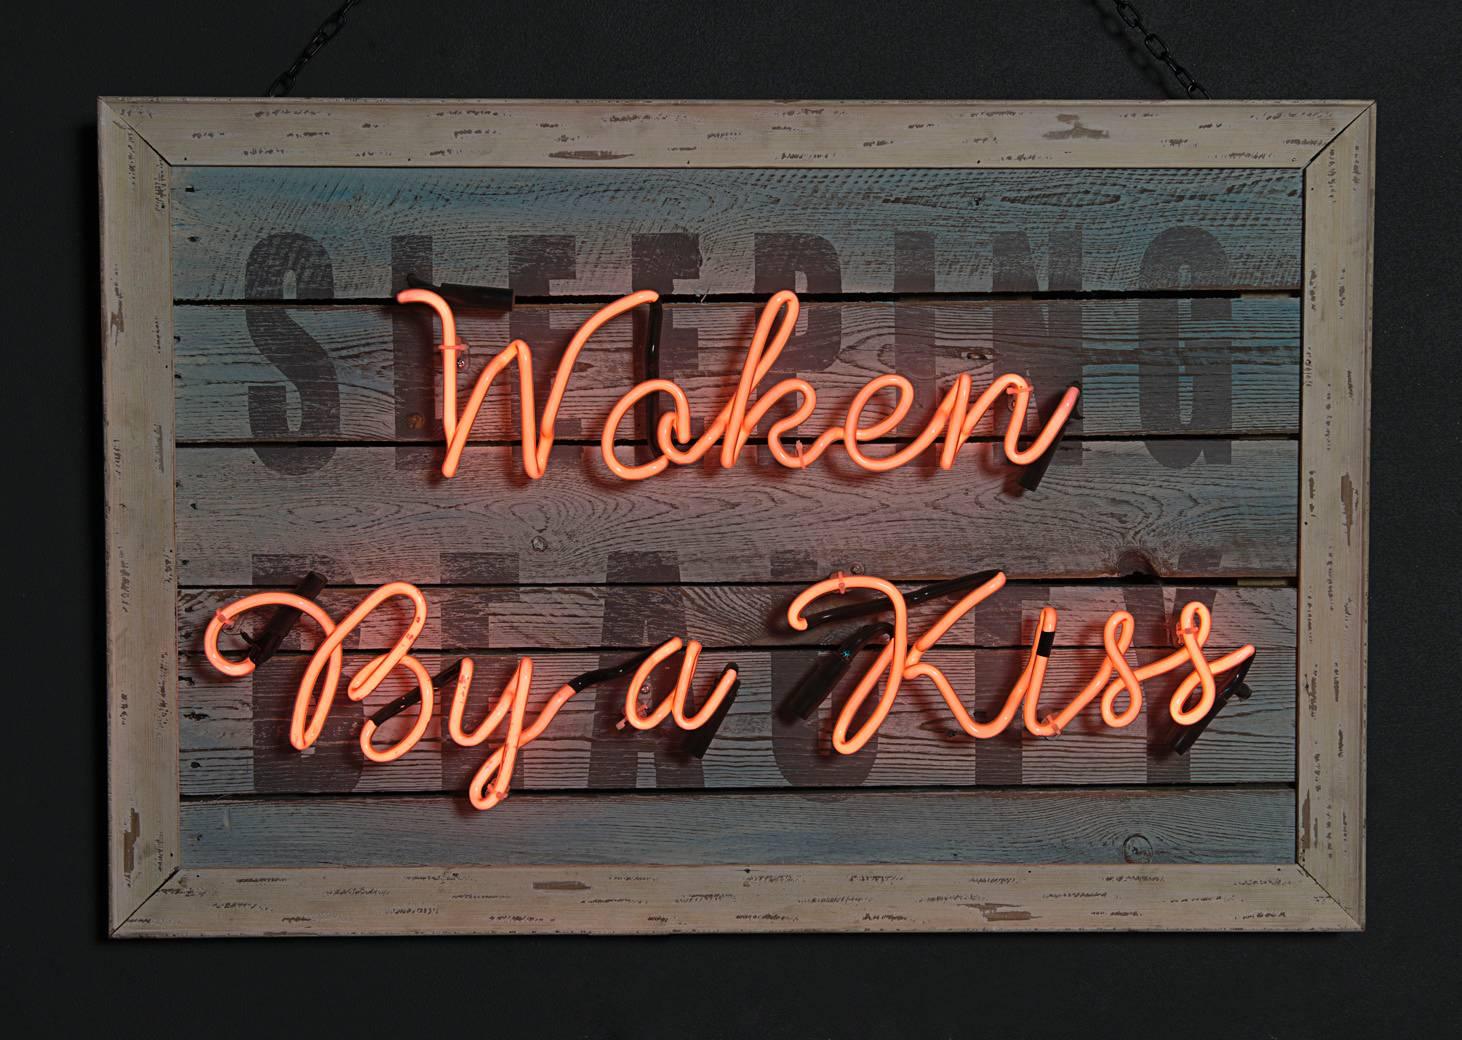 God's Own Junkyard designed Neon Artwork.

"Woken By A Kiss" Pink Neon on Hand-Painted Framed Wood.

Lights of Soho present... God's Own Junkyard. New & used neon fantasies, salvaged signs, vintage neons, old movie props and retro